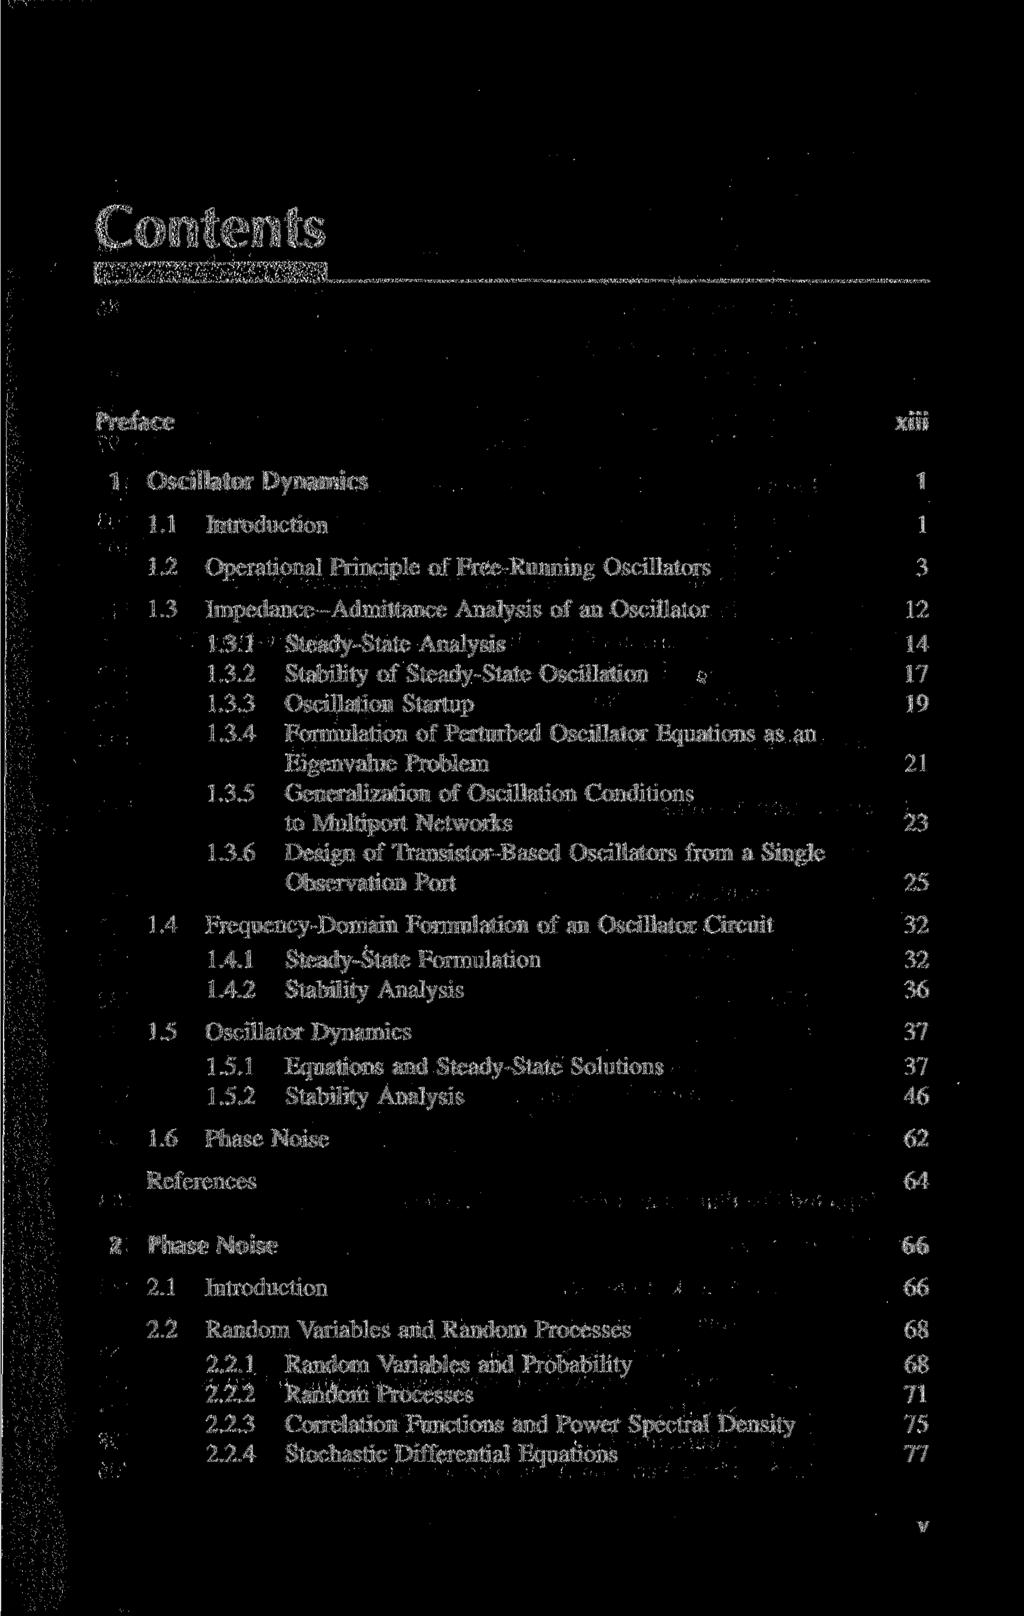 Contents Preface xiii 1 Oscillator Dynamics 1 1.1 Introduction 1 1.2 Operational Principle of Free-Running Oscillators 3 1.3 Impedance-Admittance Analysis of an Oscillator 12 1.3.1 Steady-State Analysis 14 1.